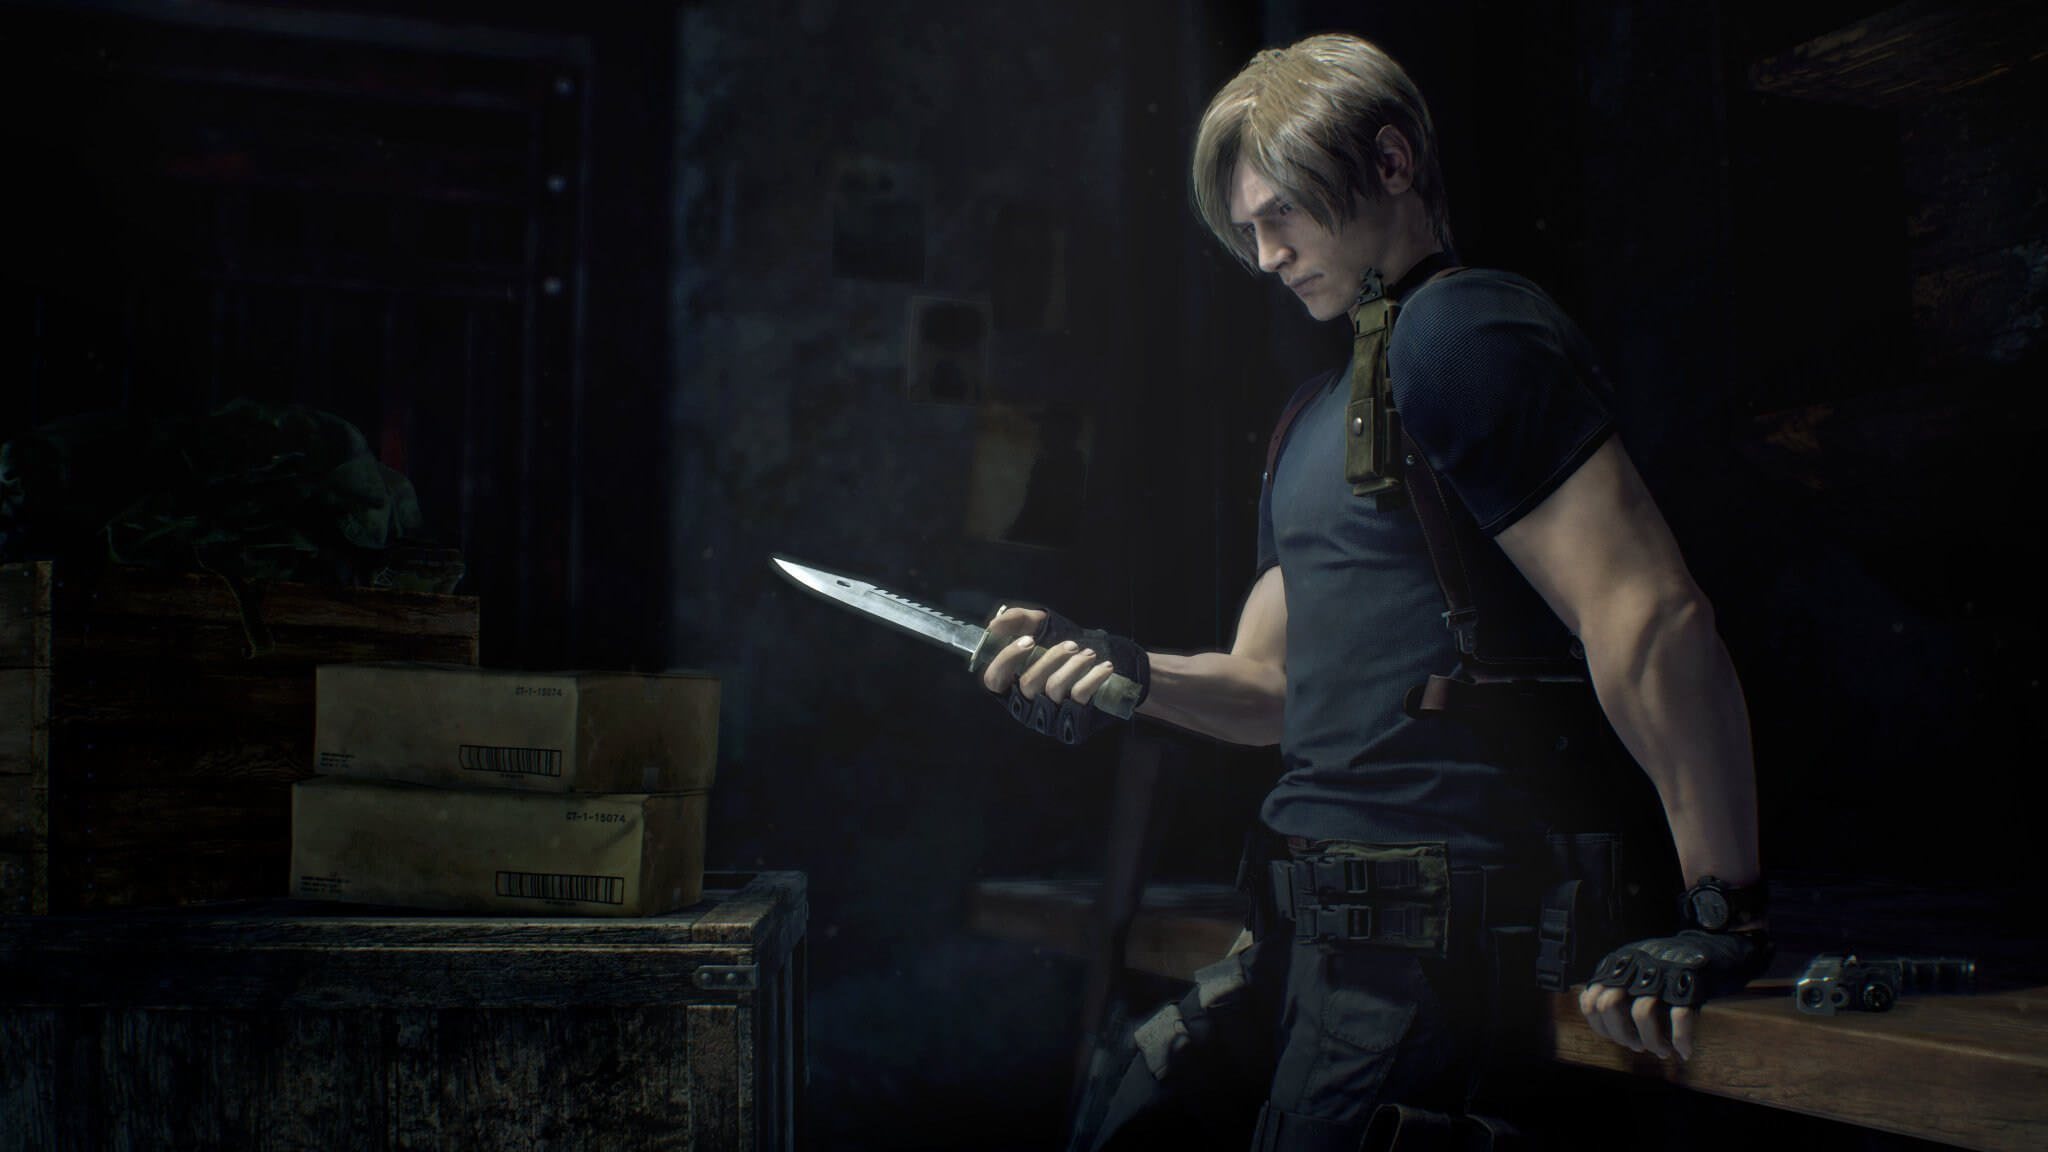 Resident Evil 4 Remake vs Original: Graphics & Characters compared